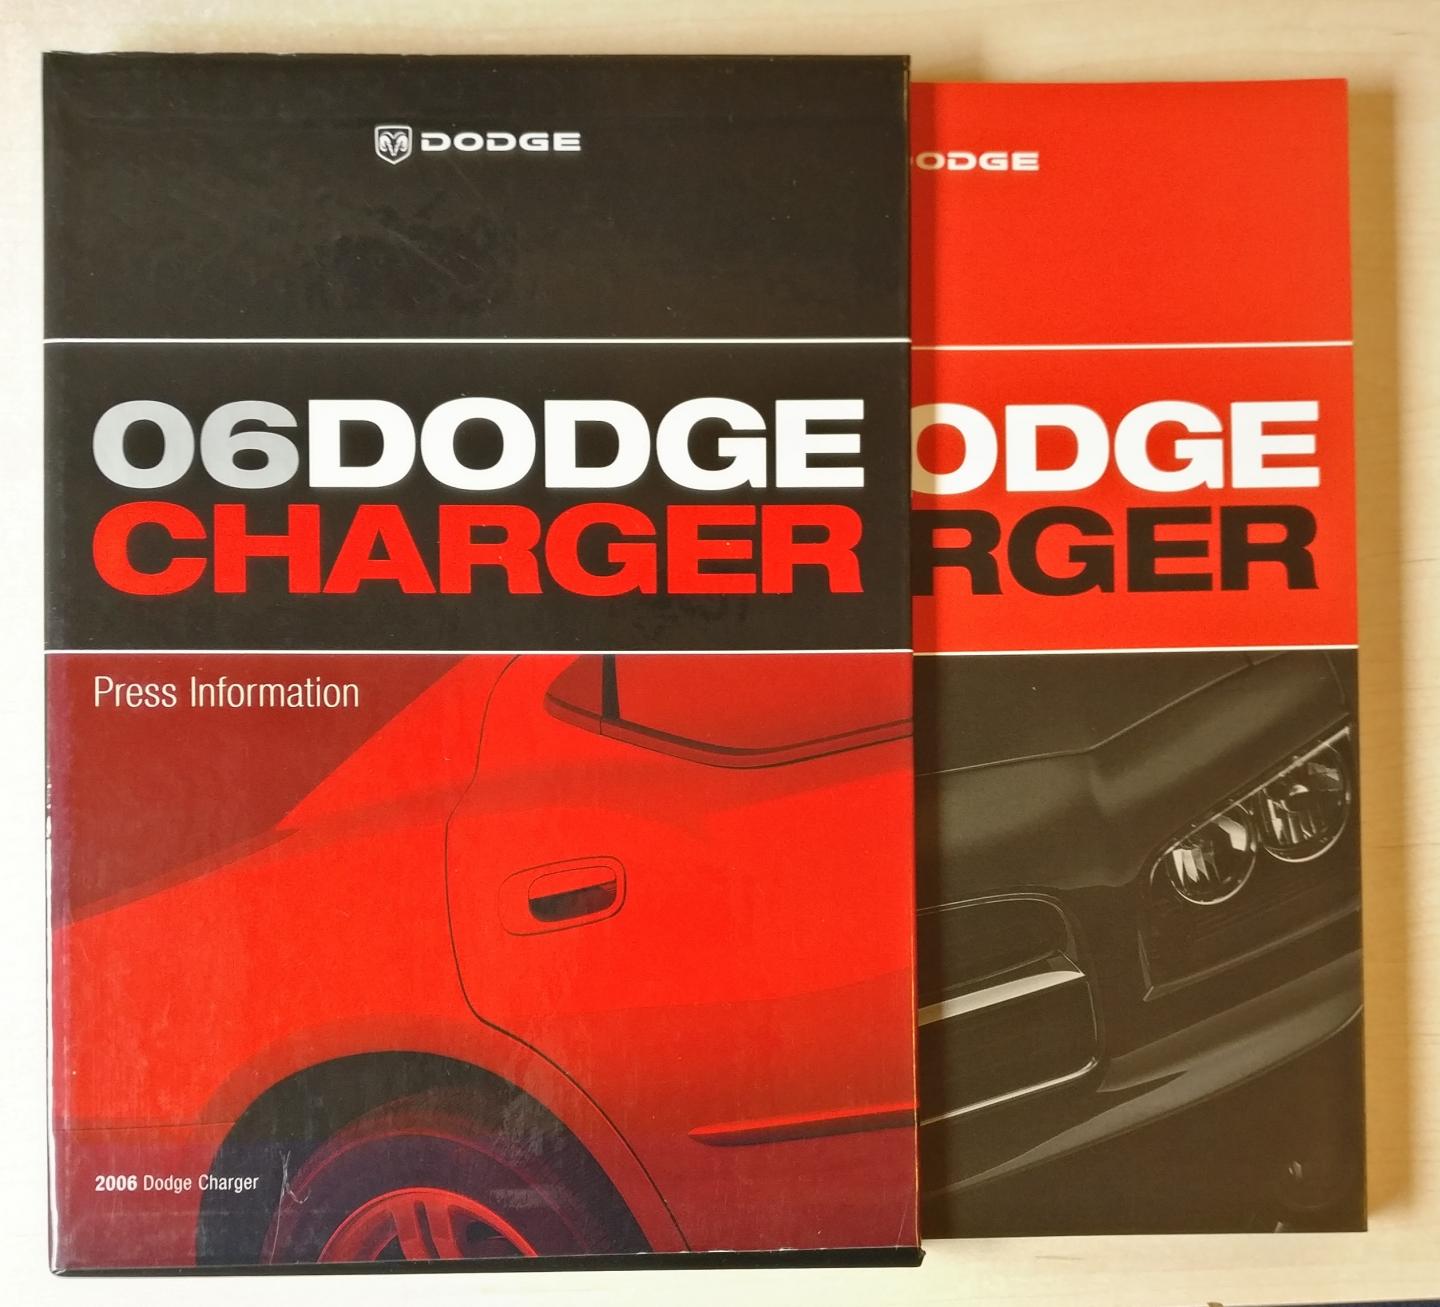  - 06 Dodge Charger - Press Information - Inc. CD-ROM